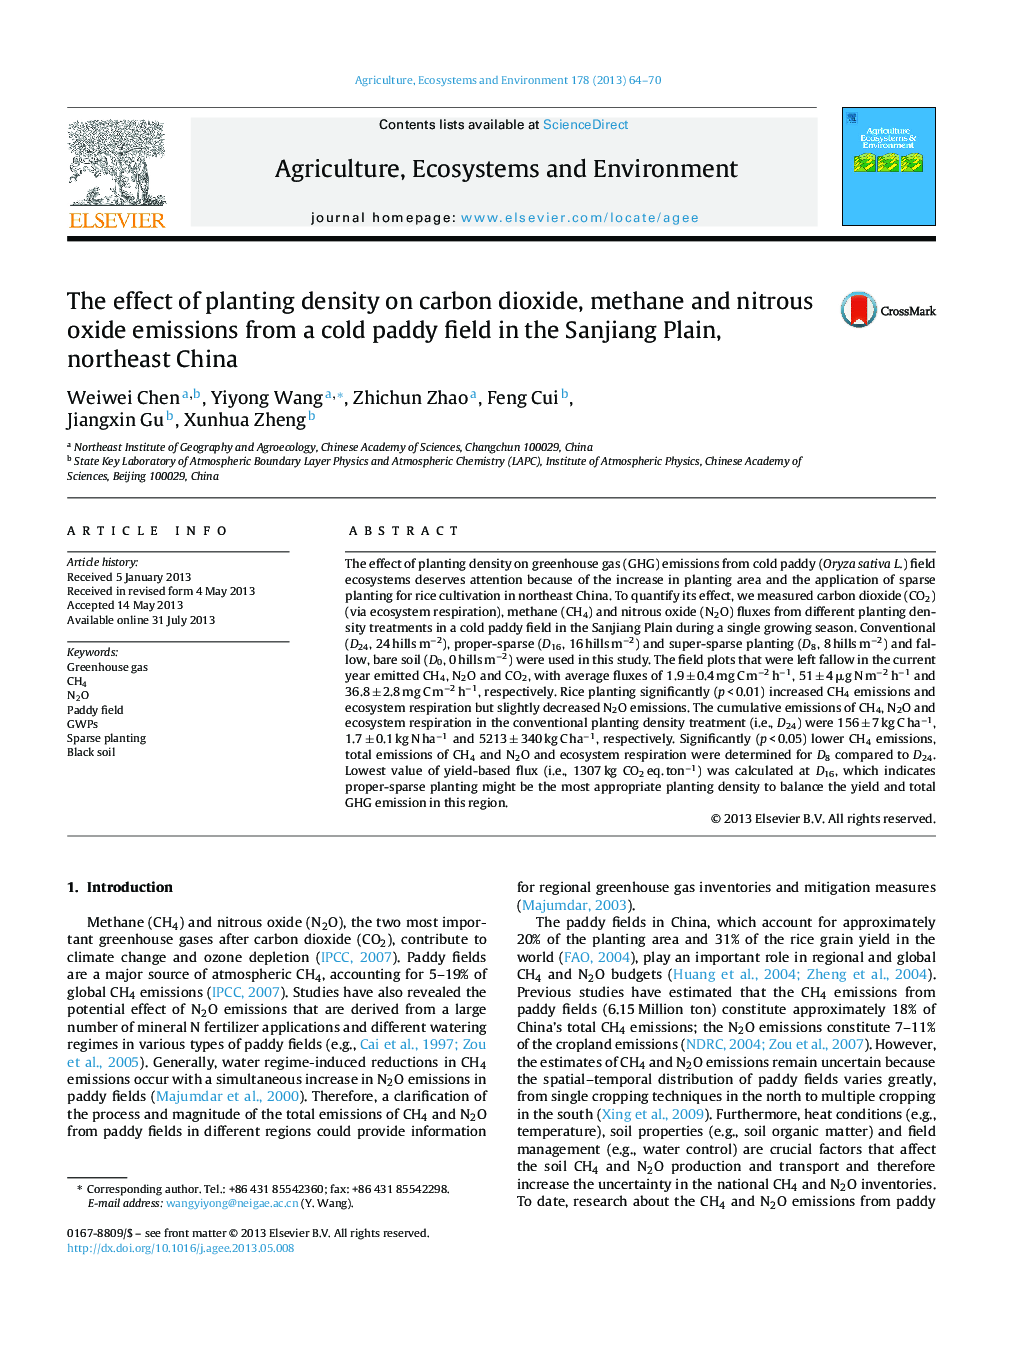 The effect of planting density on carbon dioxide, methane and nitrous oxide emissions from a cold paddy field in the Sanjiang Plain, northeast China